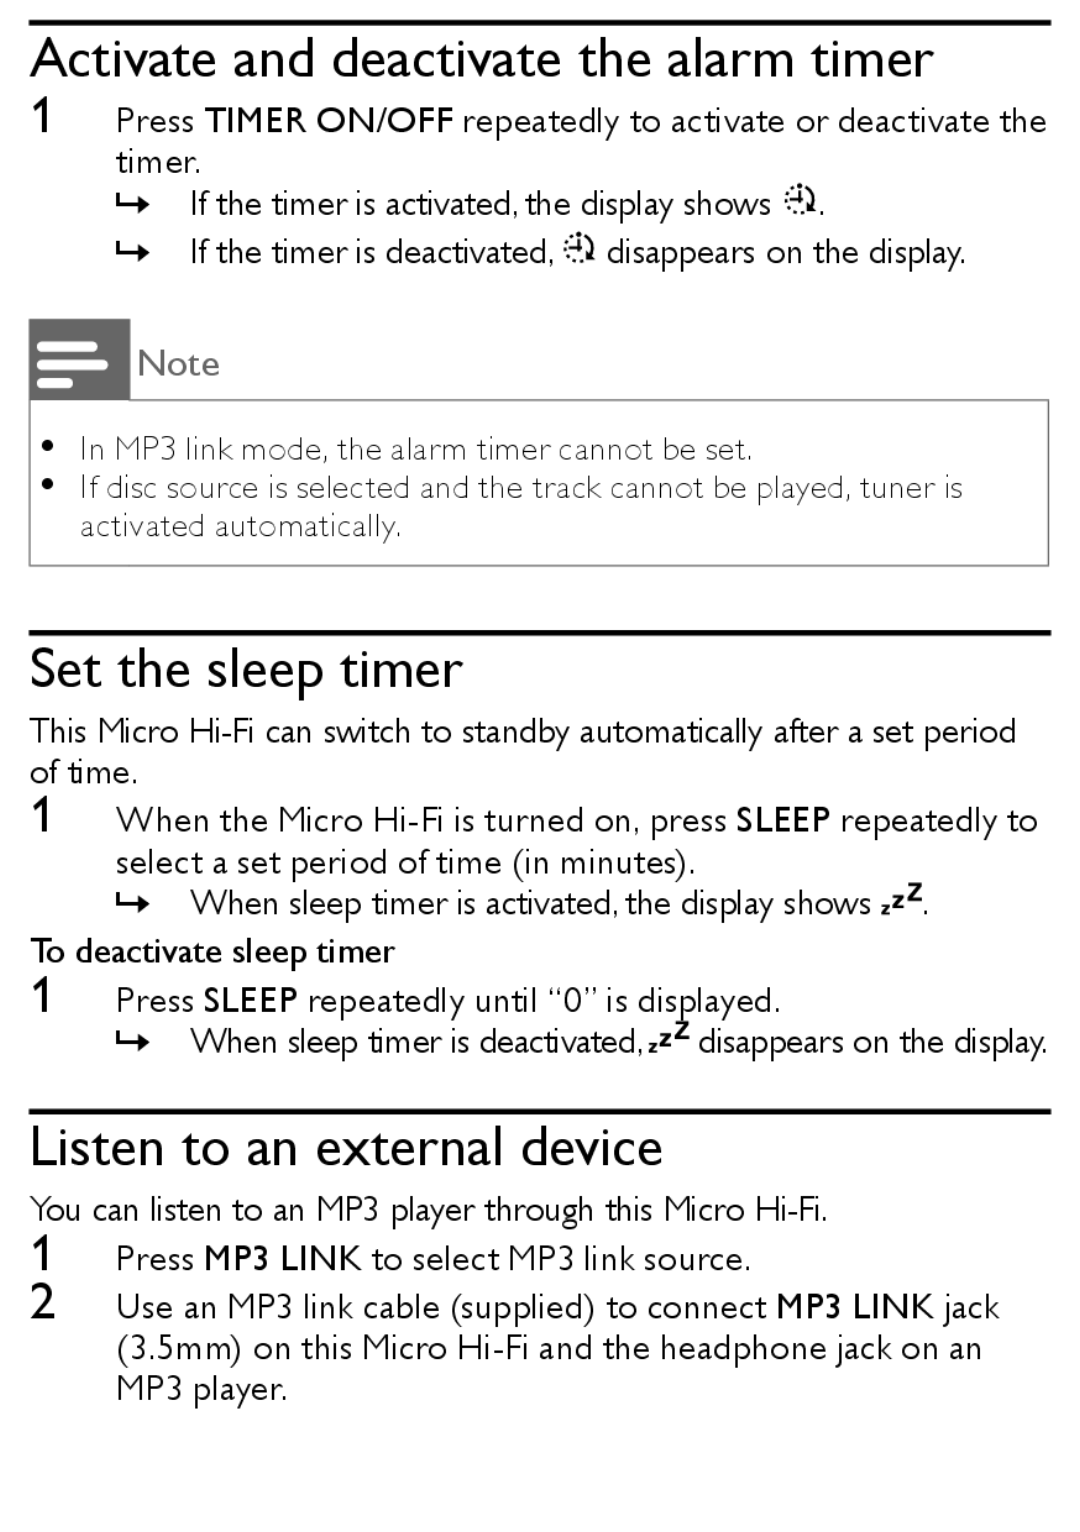 Philips MCM167 user manual Activate and deactivate the alarm timer, Set the sleep timer, Listen to an external device 